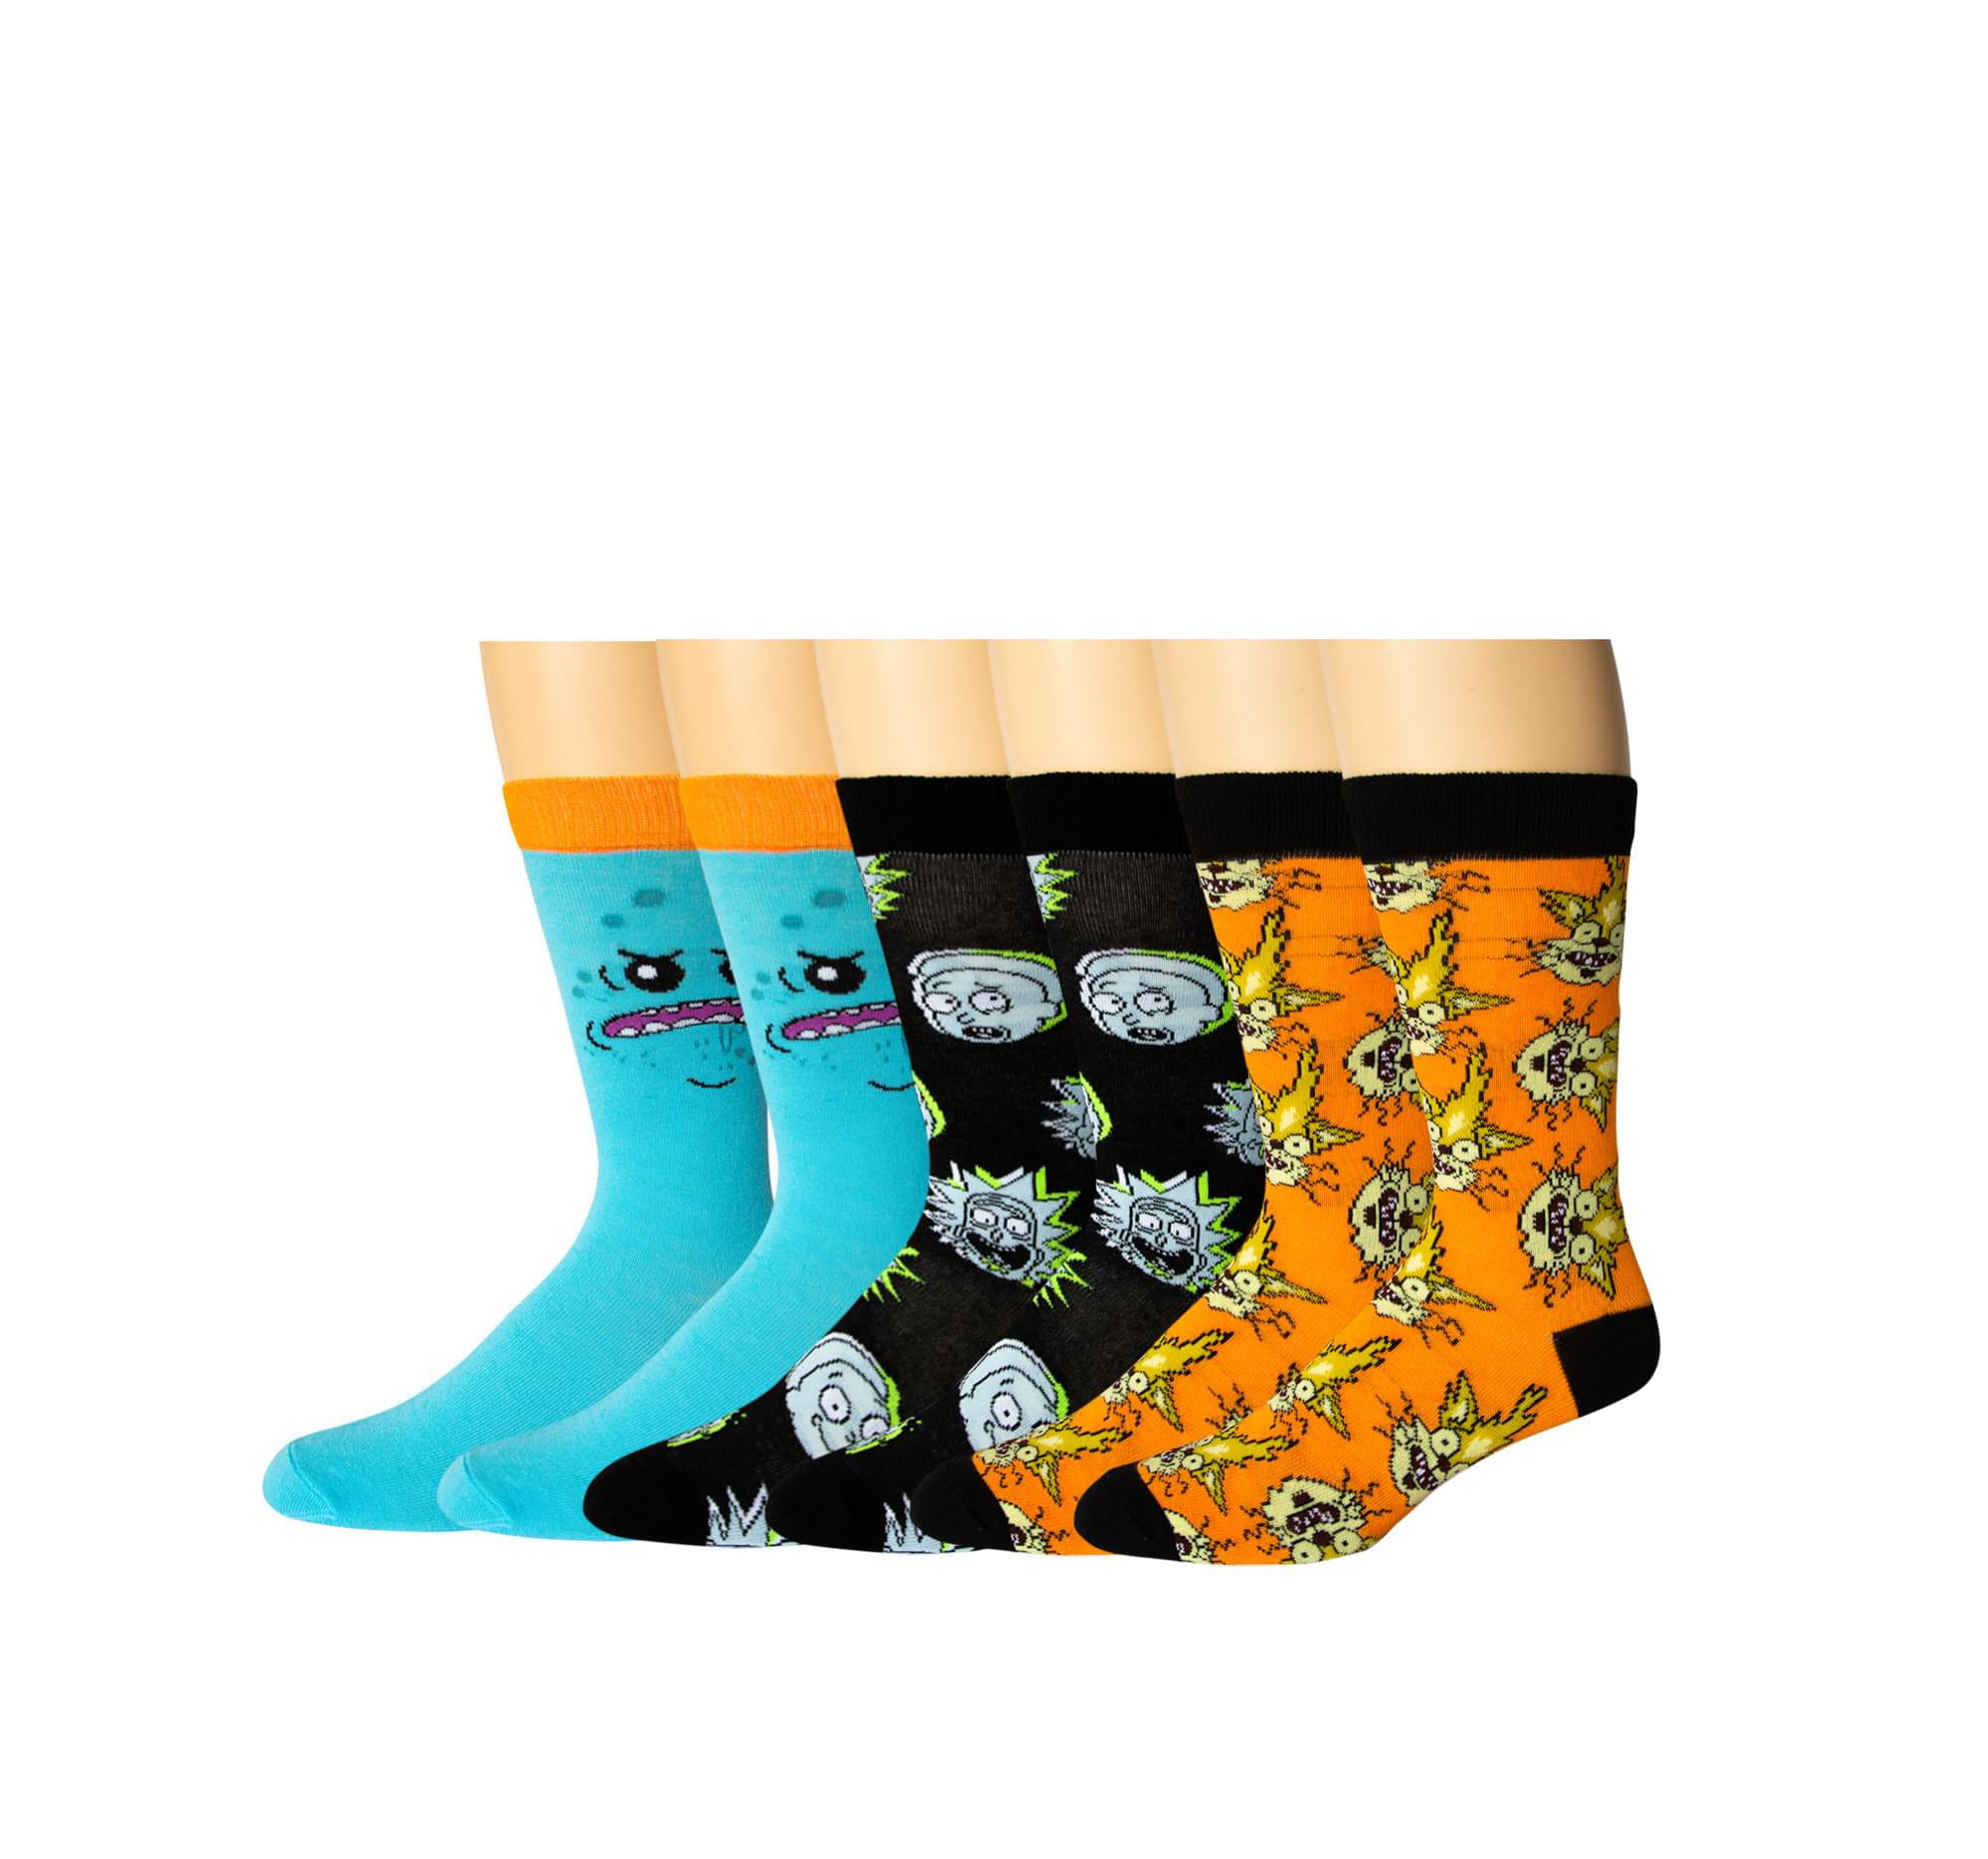 Rick and Morty Crew Socks 3-Pack | Mr. Meeseeks, Squanchy Cat, Rick and ...